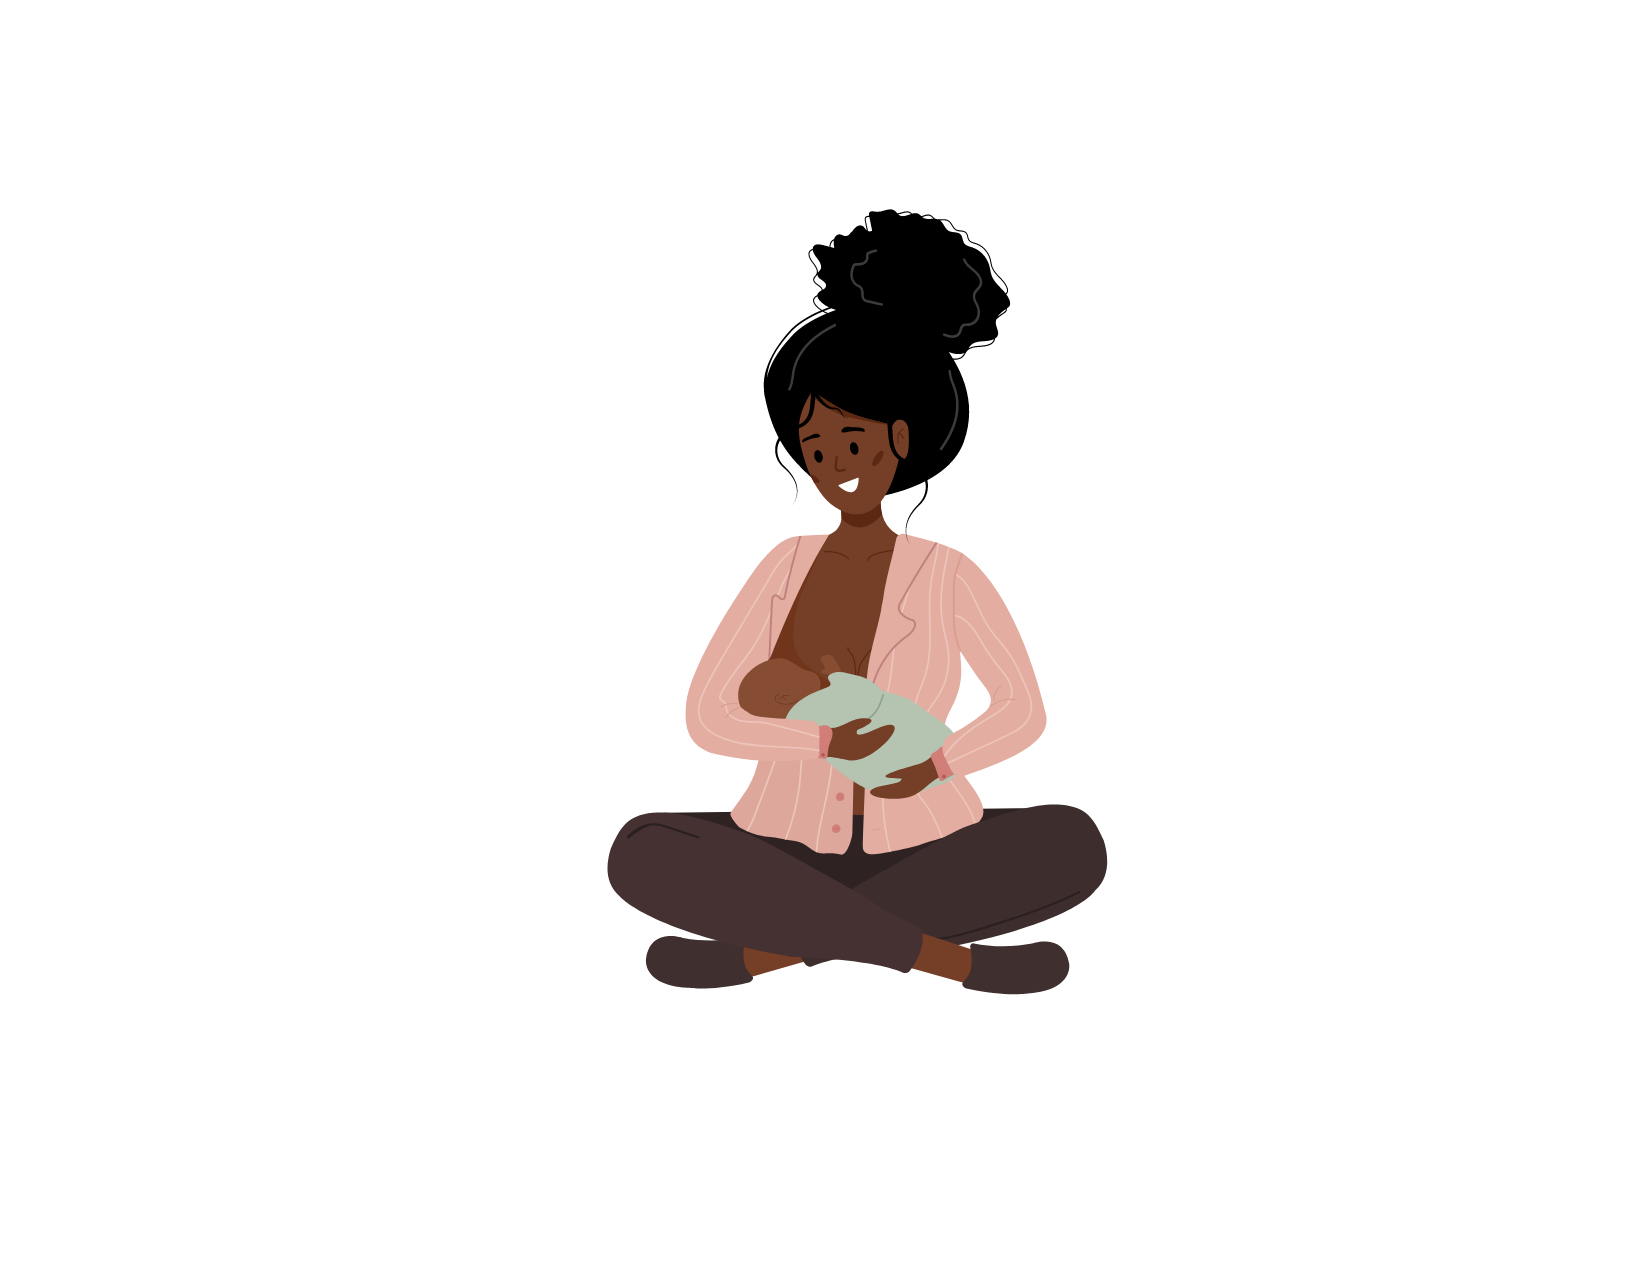 illustrated image of person sitting cross legged while breastfeeding/chestfeeding a baby